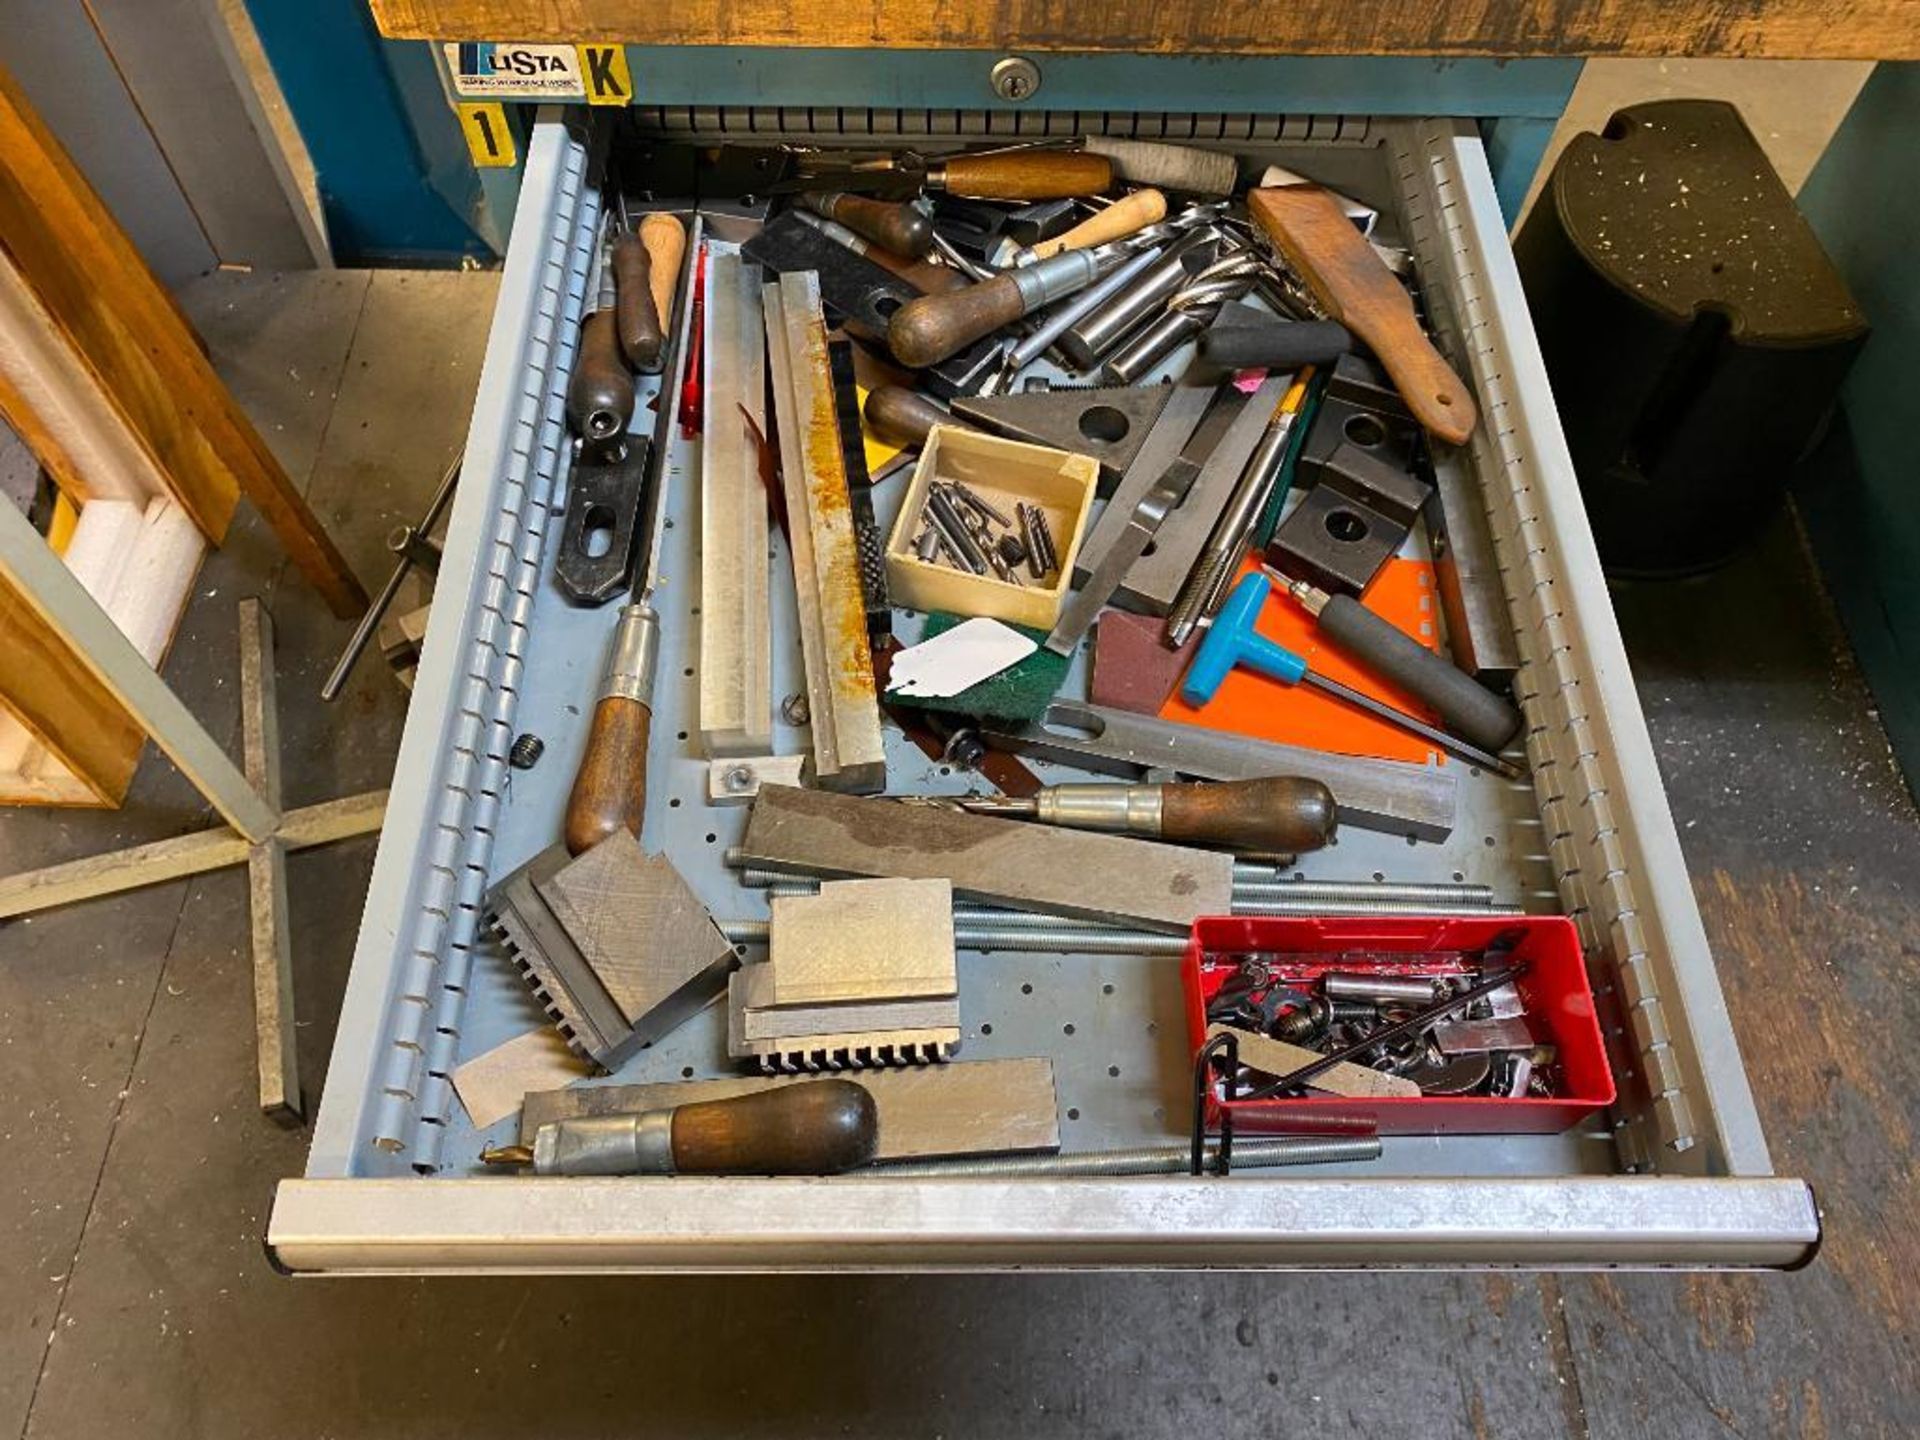 Lista Workbench with Contents - Image 2 of 7